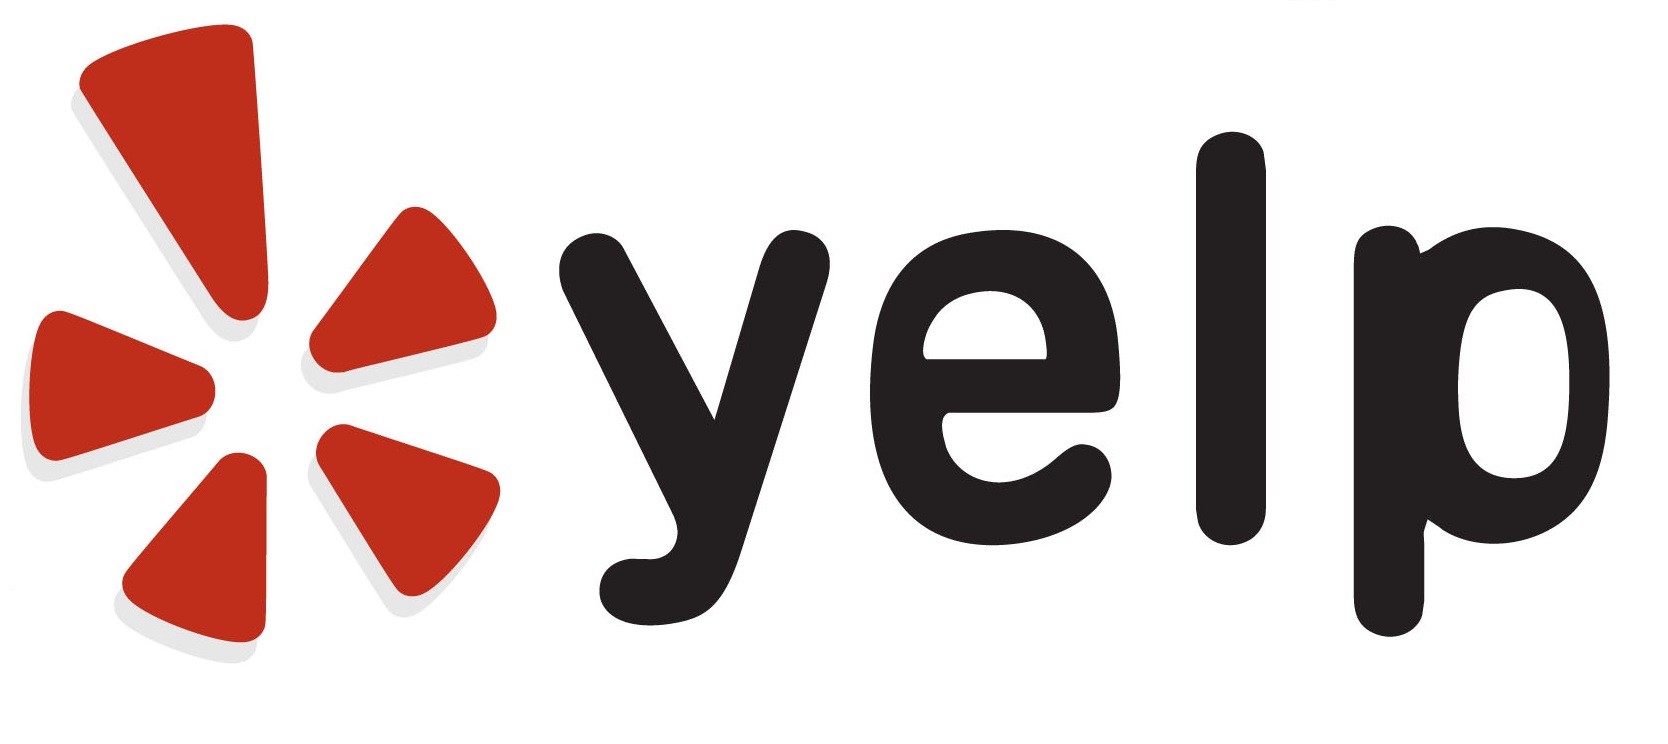 Yelp: The Crowdsourced Review Platform That Empowers Consumers